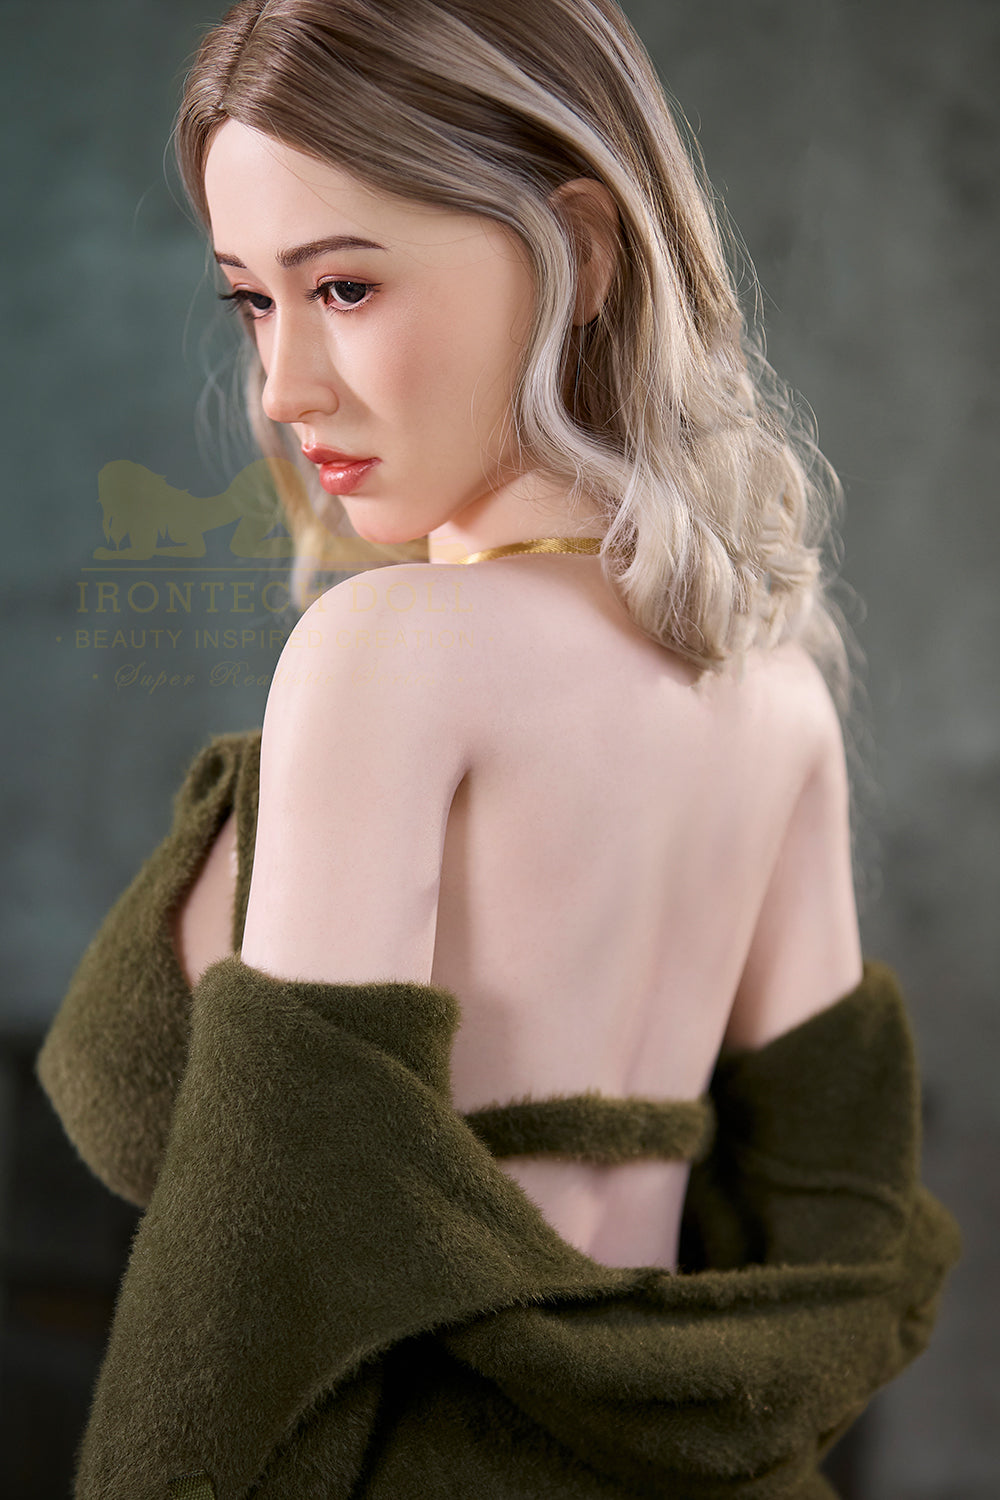 Irontechdoll Karlee 159cm S7 Full Silicone Sex Doll Natural Skin Big Boobs Adult Love Doll